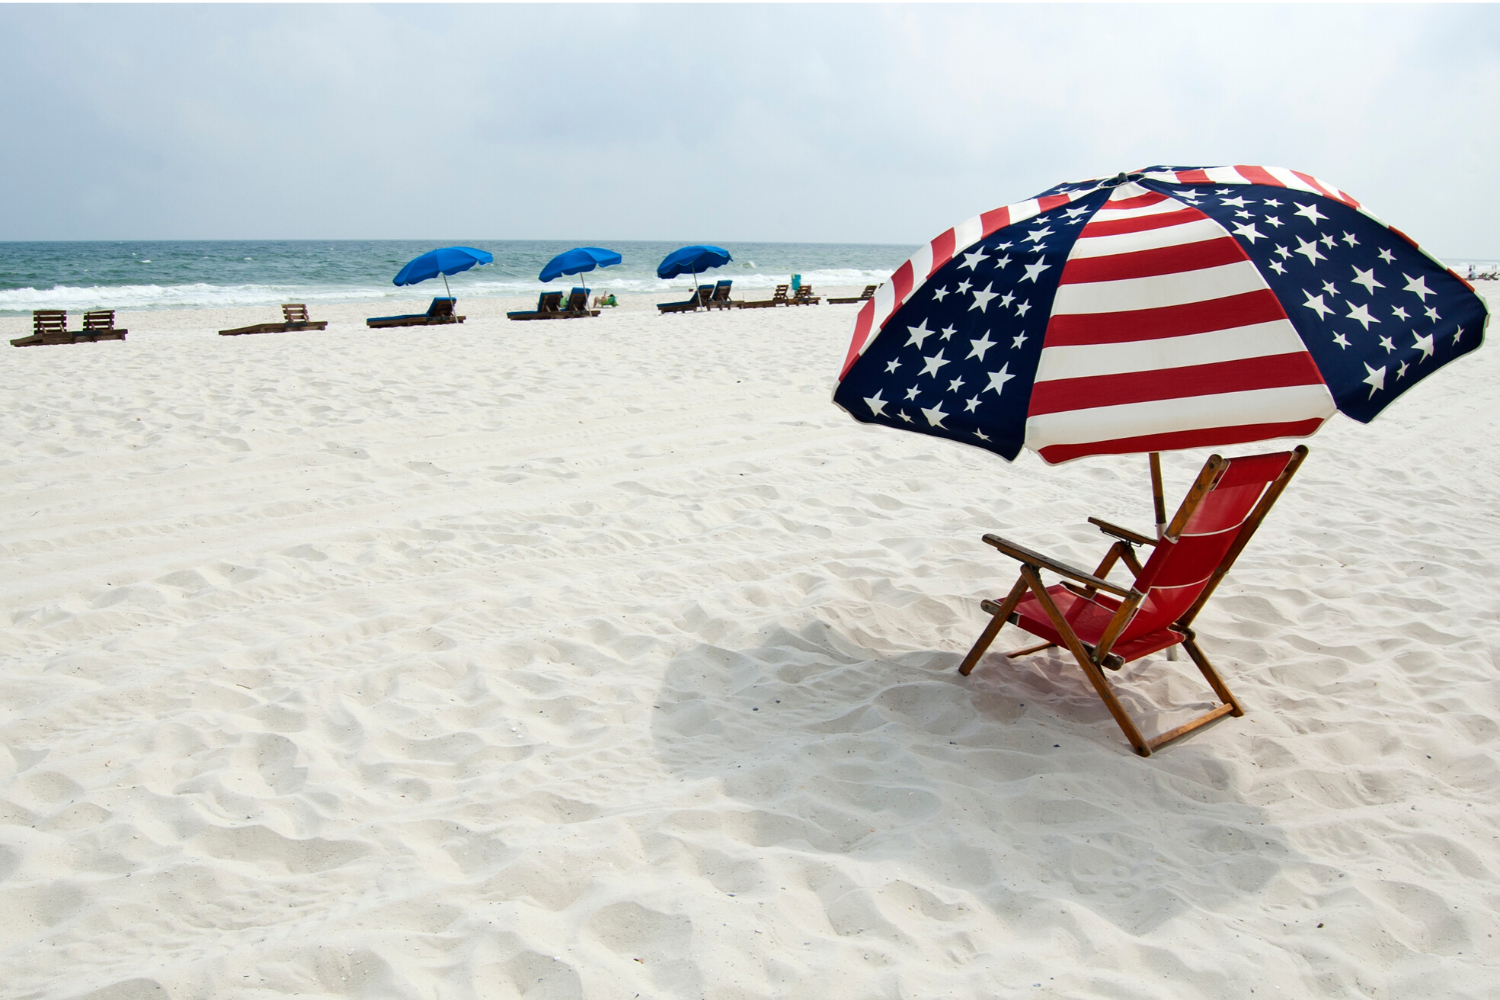  Beach Chair Rentals Biloxi Ms for Small Space